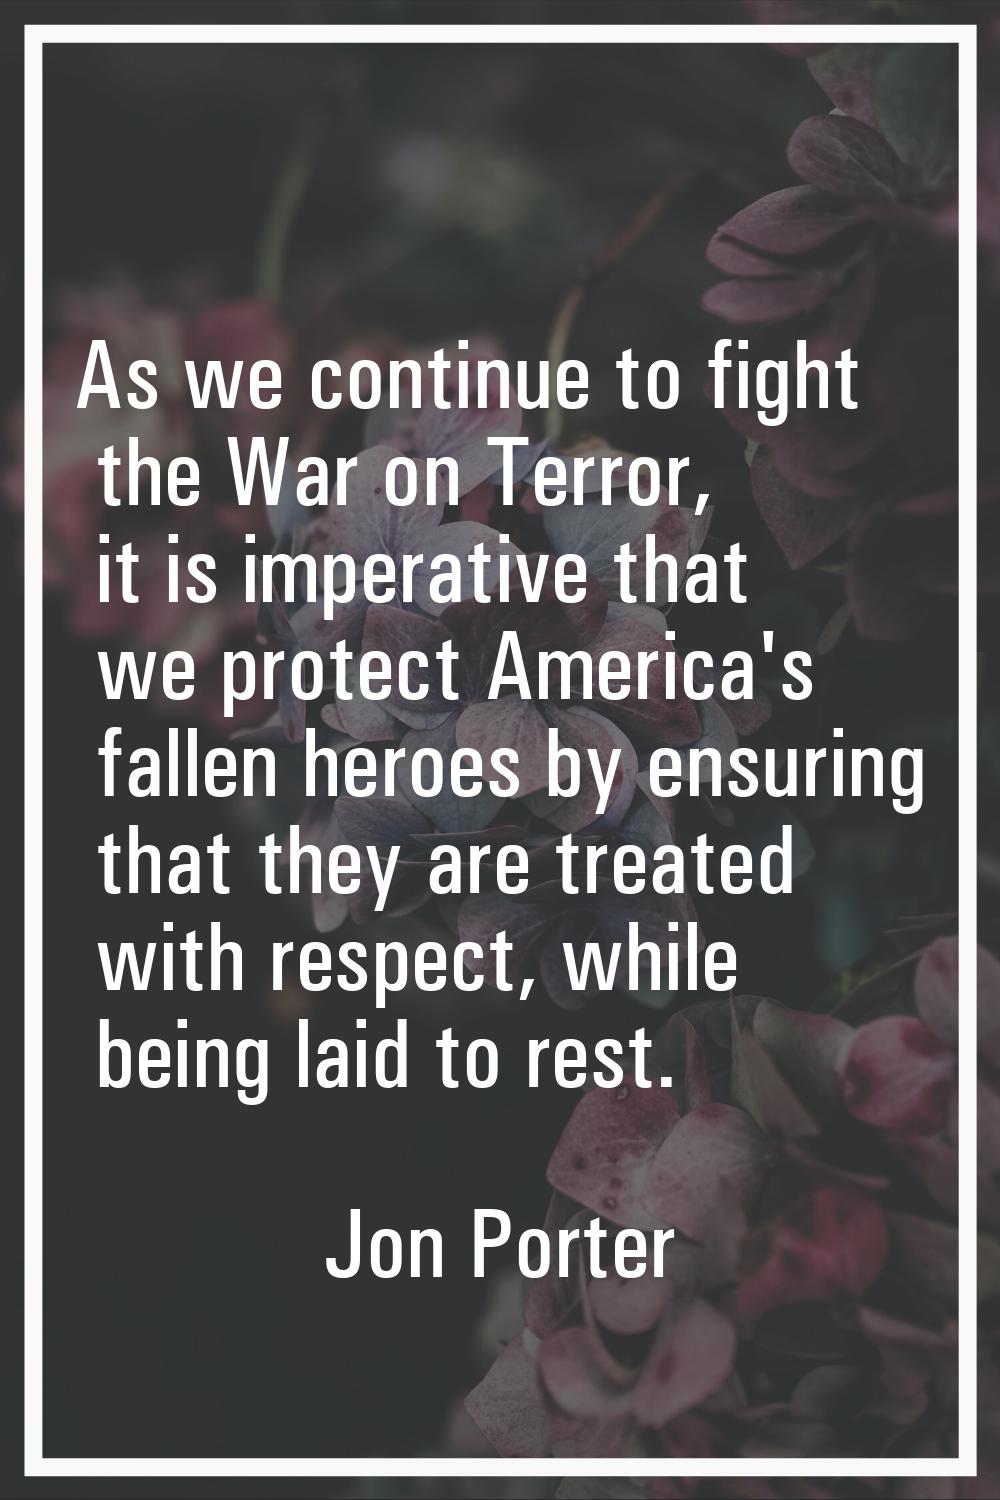 As we continue to fight the War on Terror, it is imperative that we protect America's fallen heroes